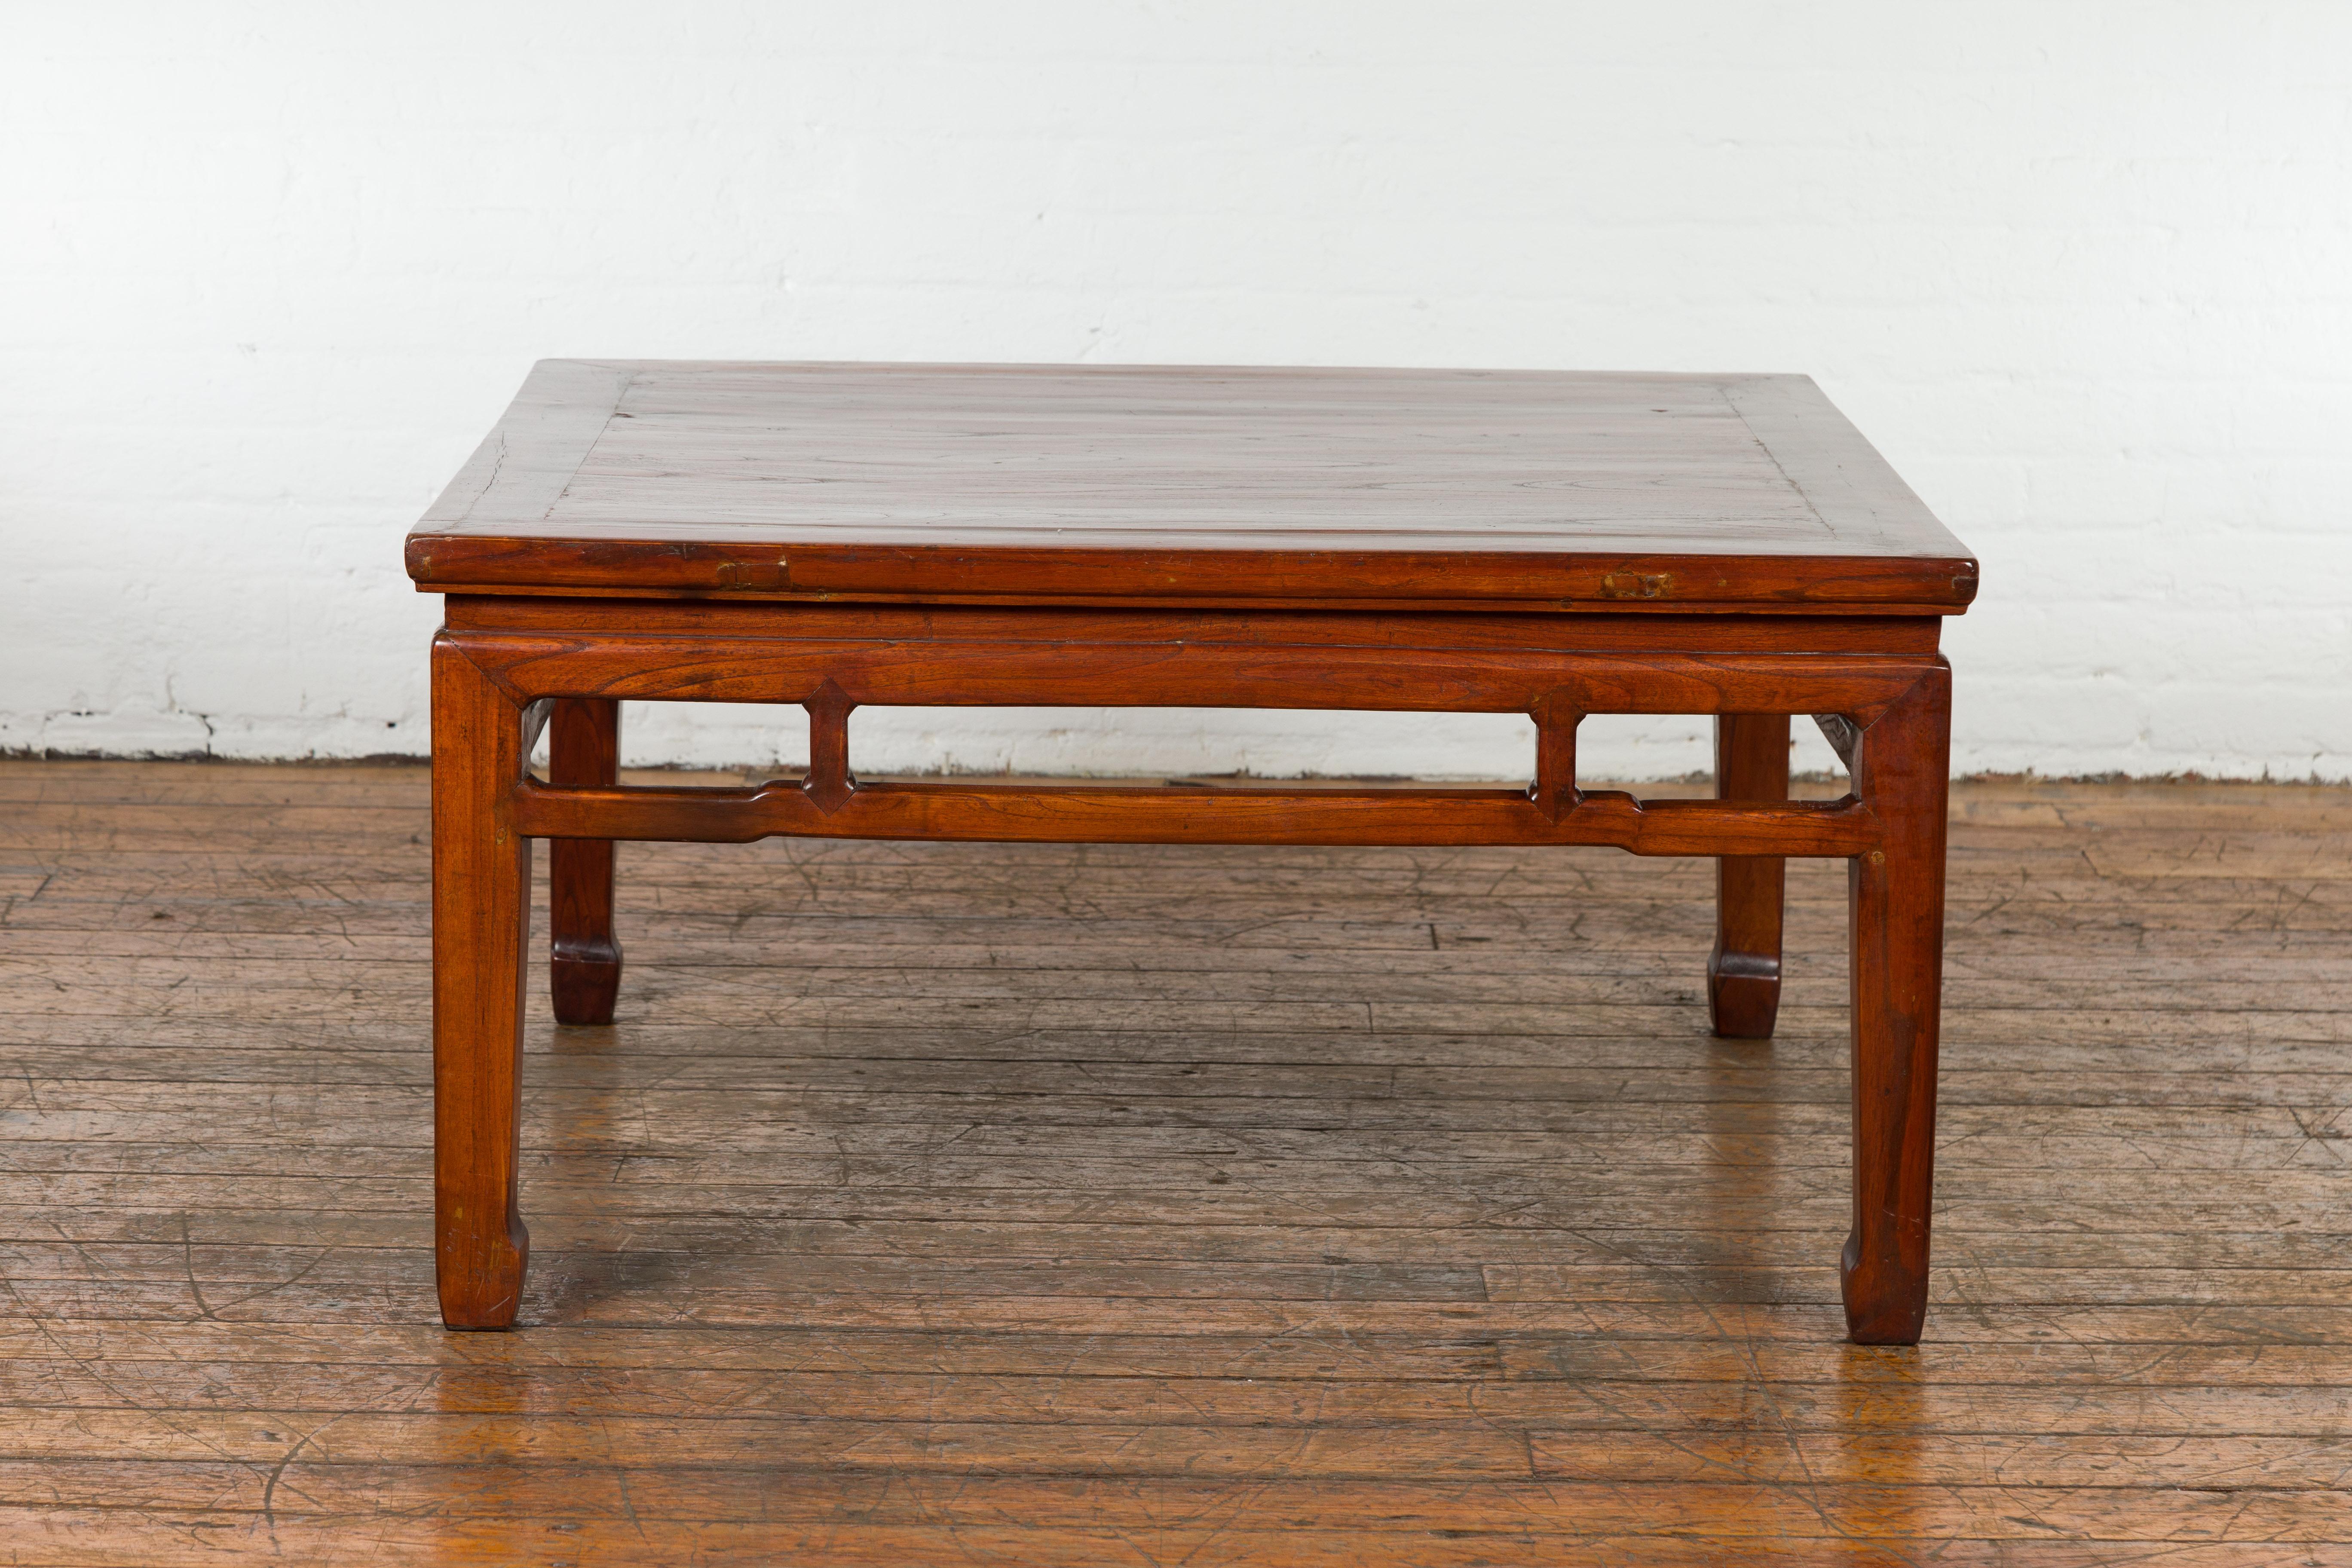 A Chinese late Qing Dynasty period square top coffee table from the early 20th century with pierced apron, pillar strut motifs, humpback stretchers on all sides and horsehoof extremities. Emanating the spirit of the early 20th-century late Qing